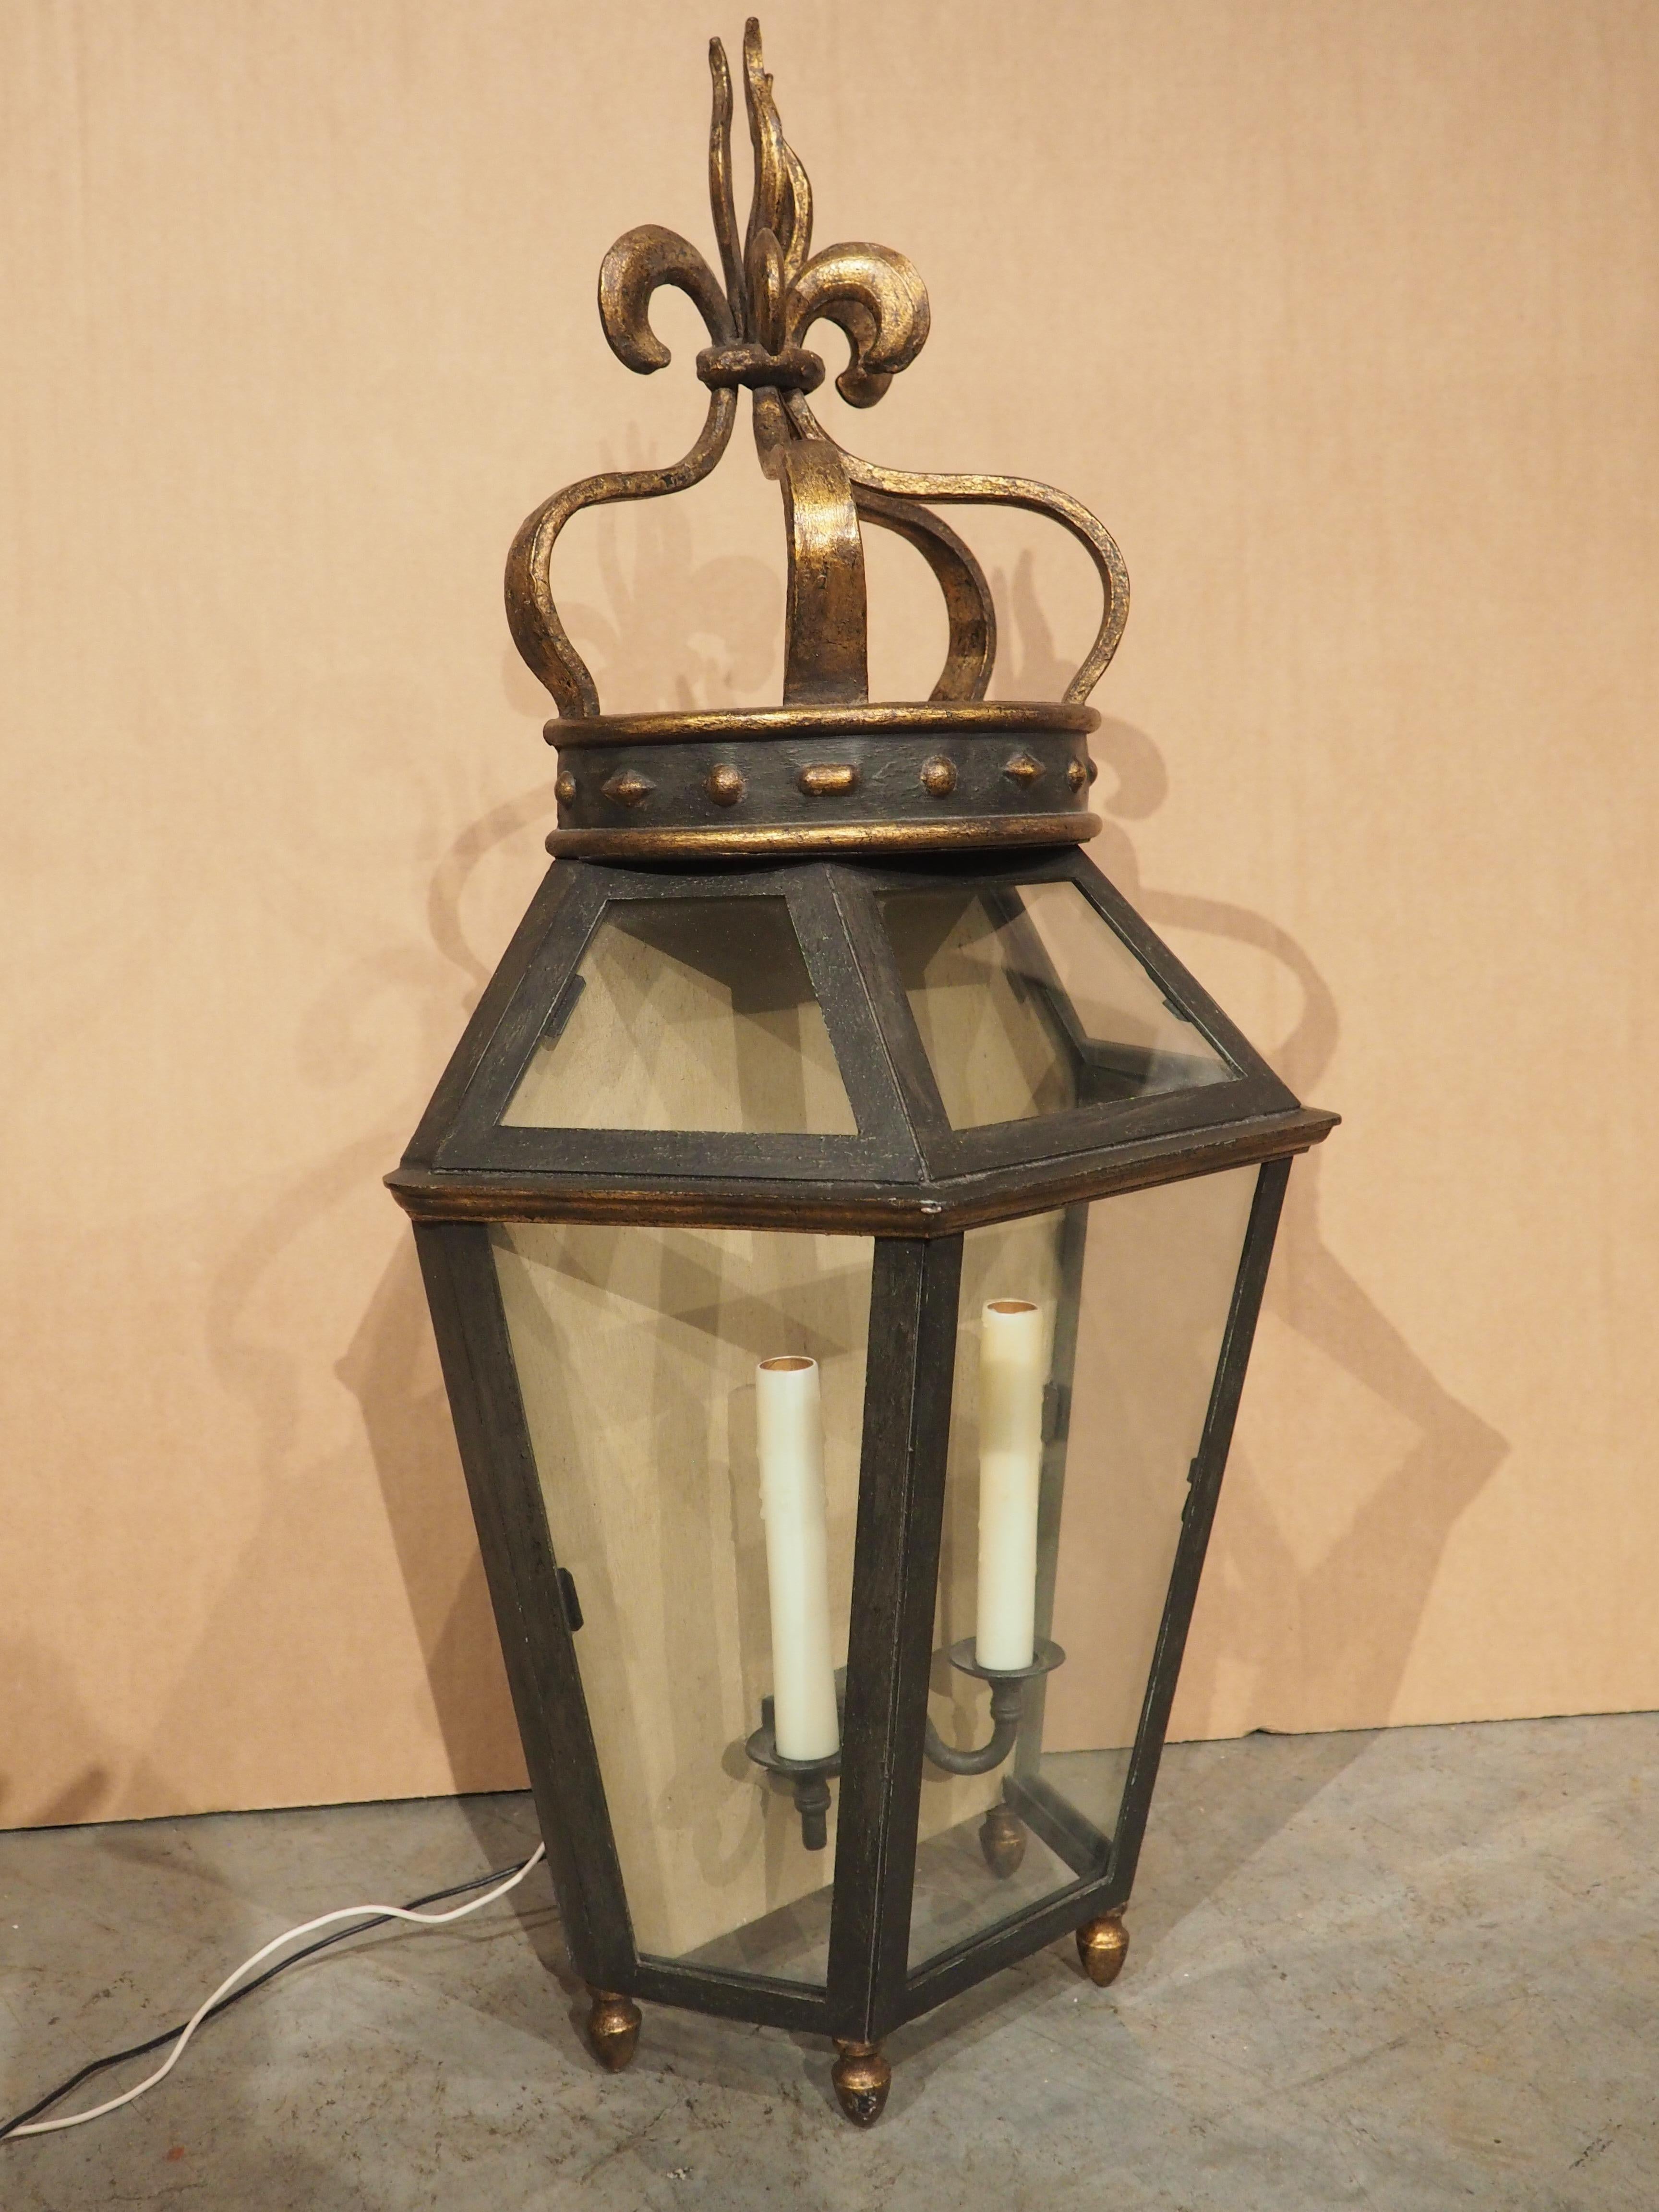 A fascinating wall lantern that can be paired with just about any architectural style from country French to Italian Renaissance. The wrought iron and glass lantern has a half-hexagon main body comprised of six panes of glass that encase two white